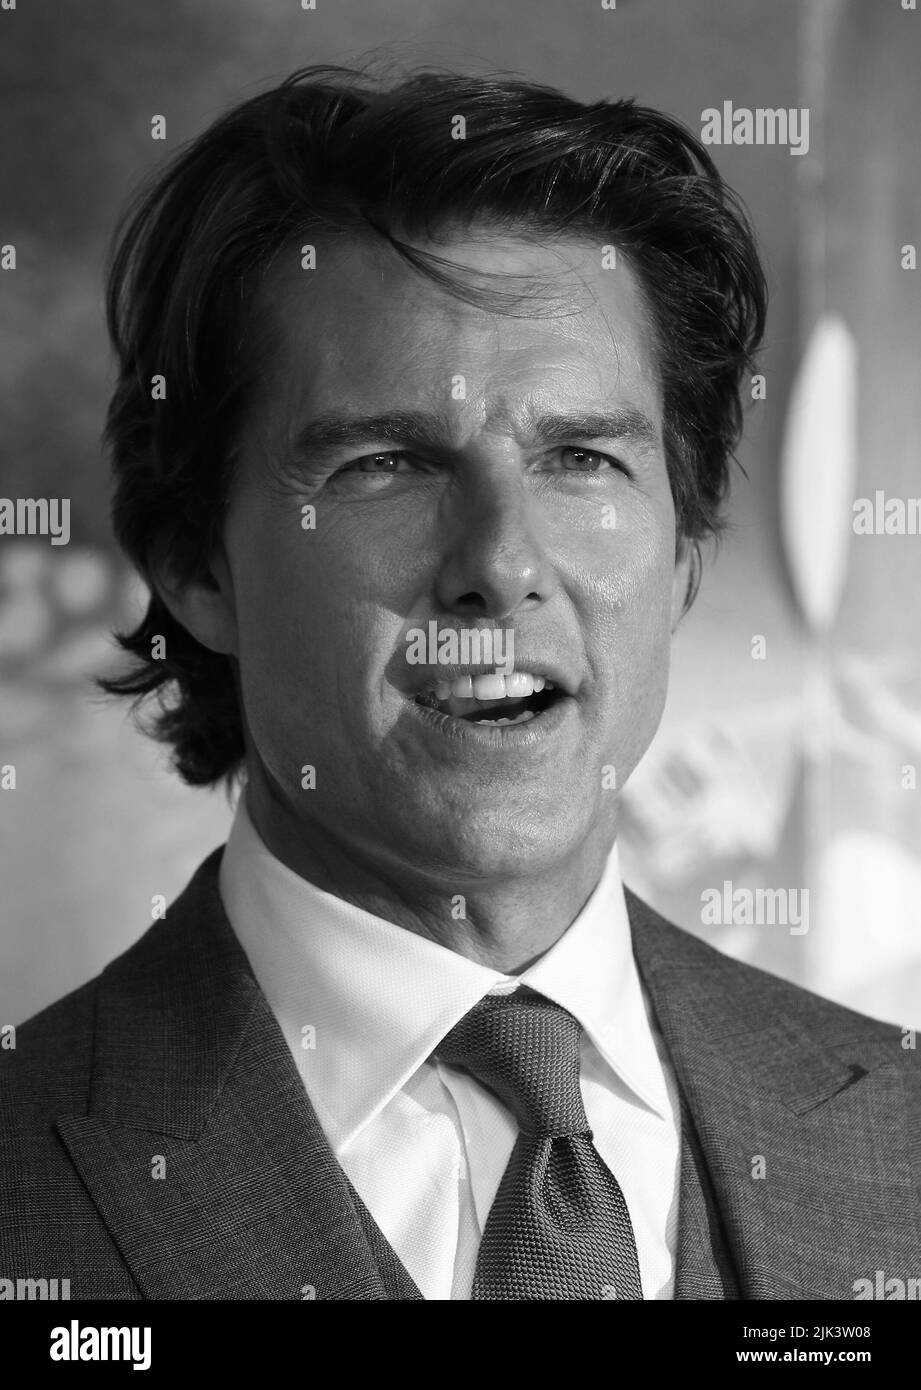 London, UK, 25. Juli 2015: Tom Cruise besucht die Mission Impossible: Rogue Nation-UK Special Screening im BFI IMAX in London Stockfoto